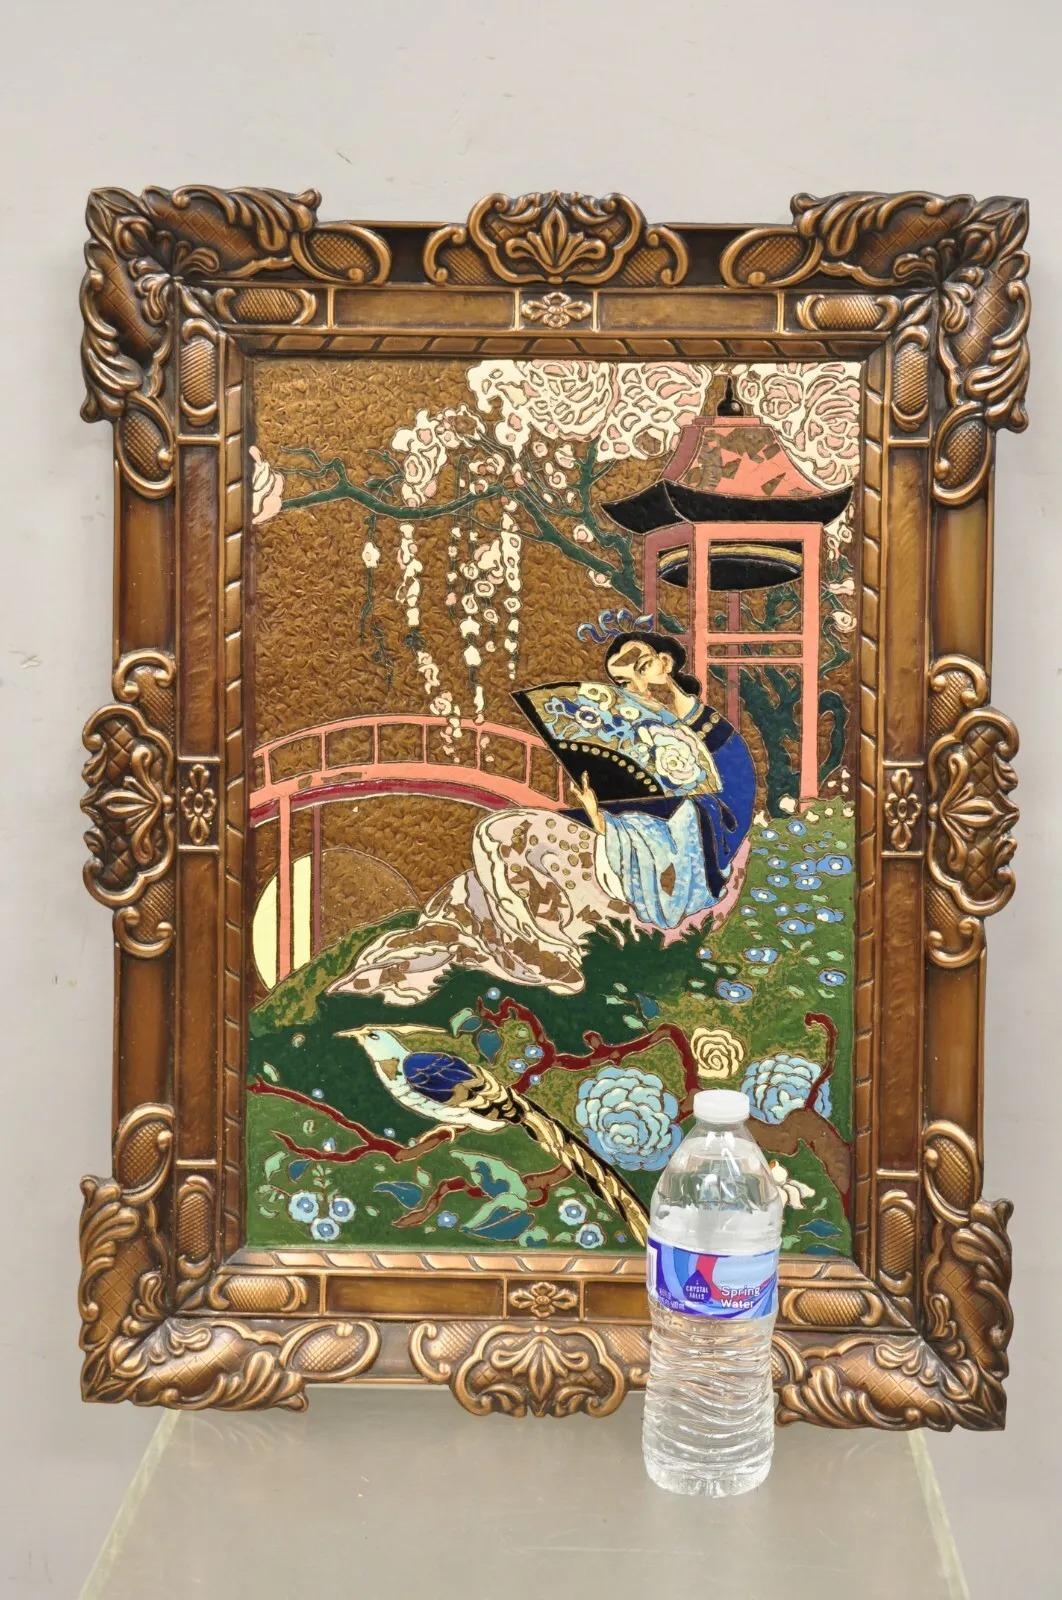 Vintage Painted Copper Metal Relief Art By A Gilles 26”x20 ” Japanese Sakura. Circa Mid to Late 20th Century. Measurements: 26